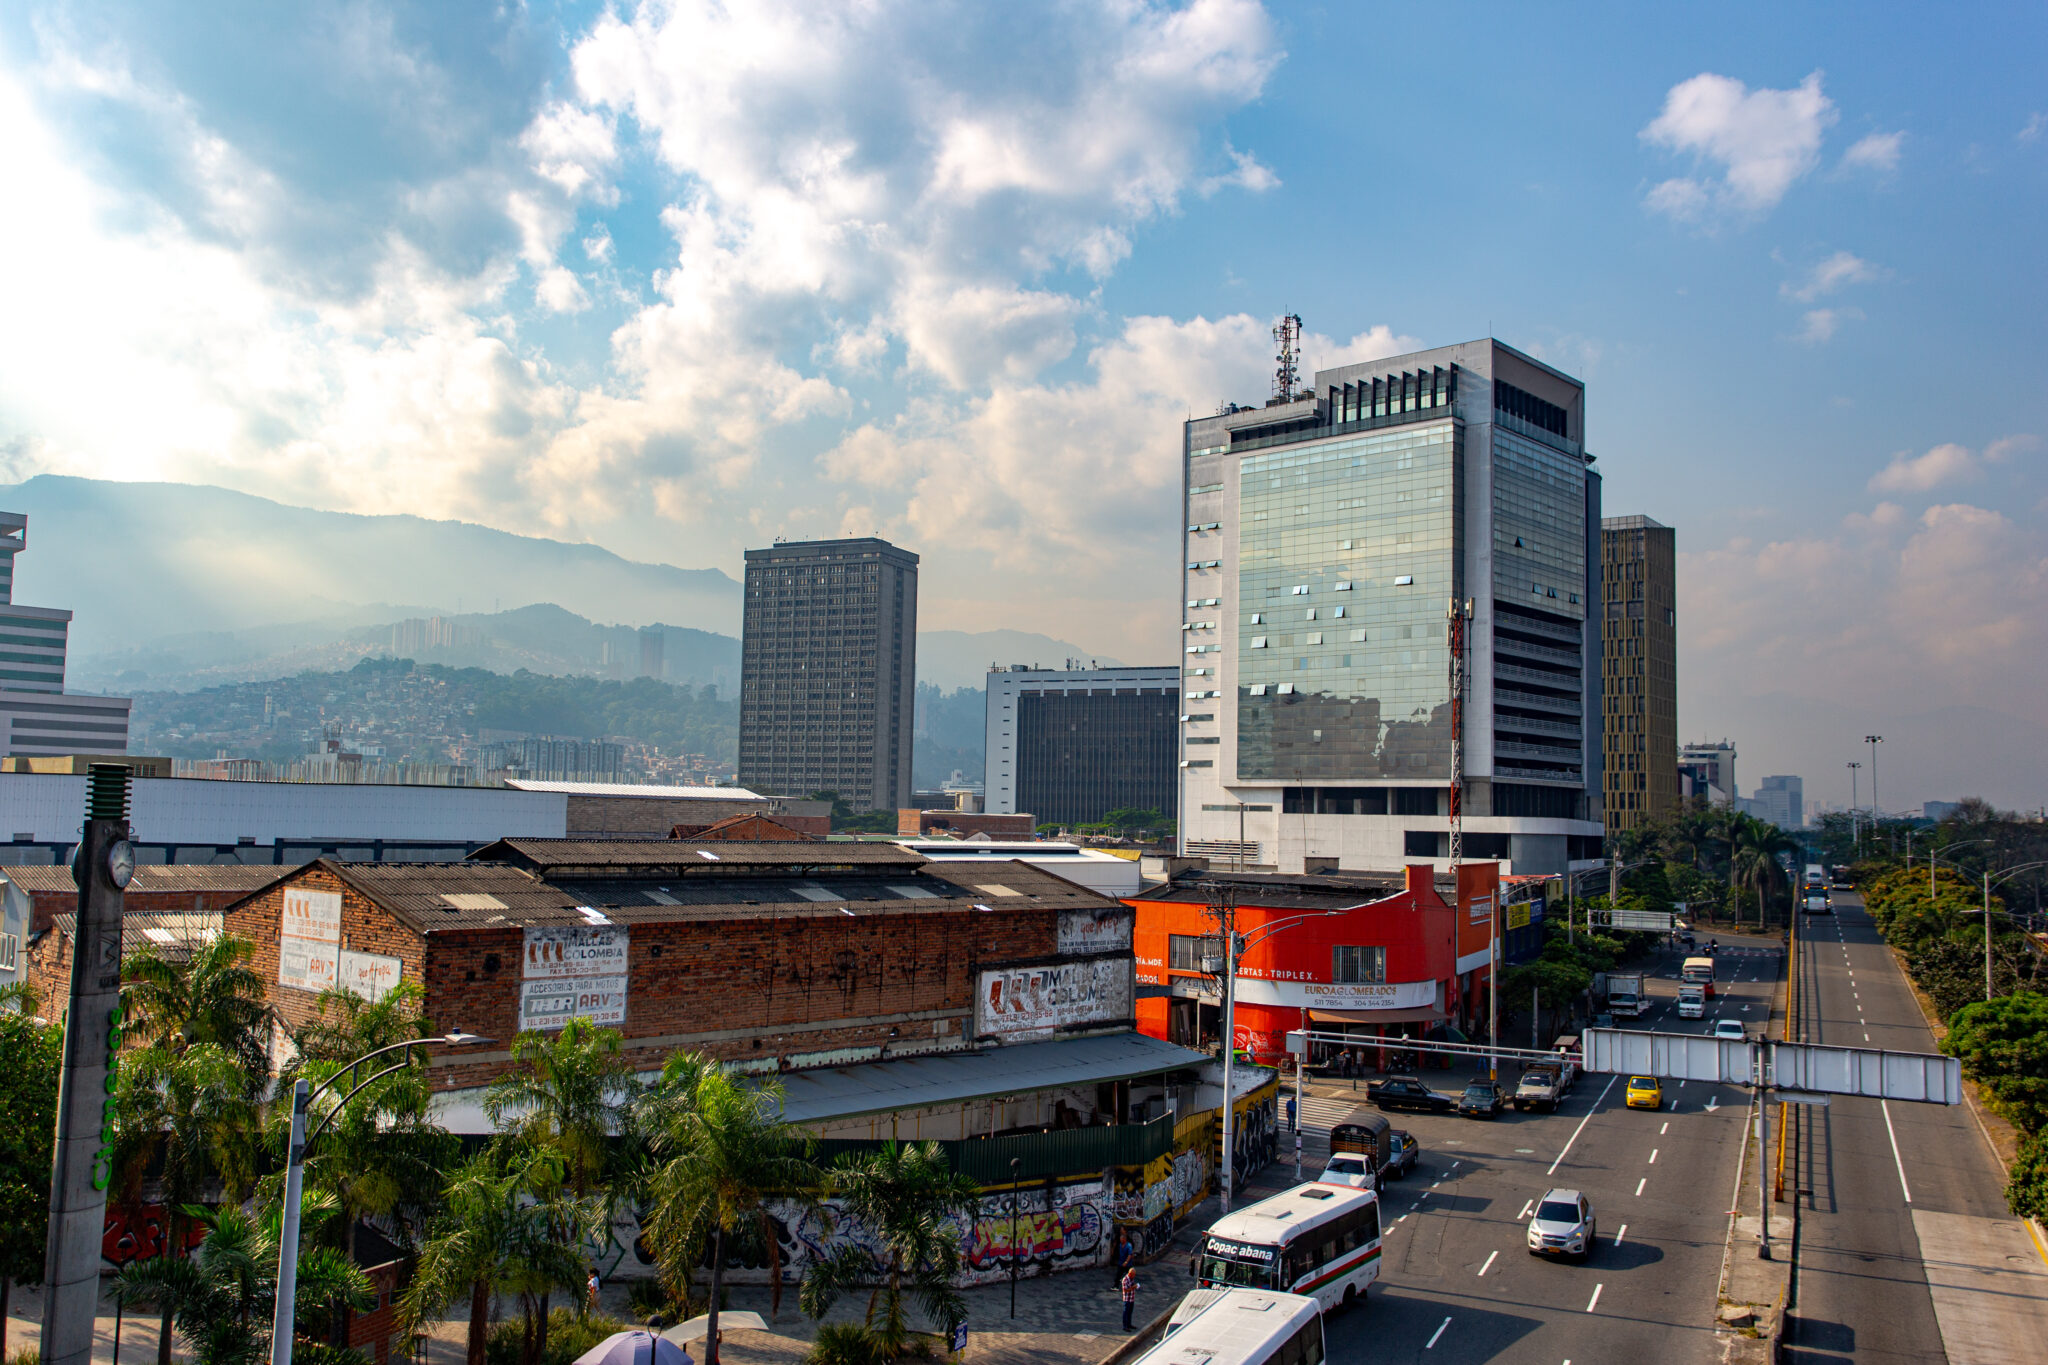 Perception or Reality? Medellín is the Rudest City in Colombia, According to Study